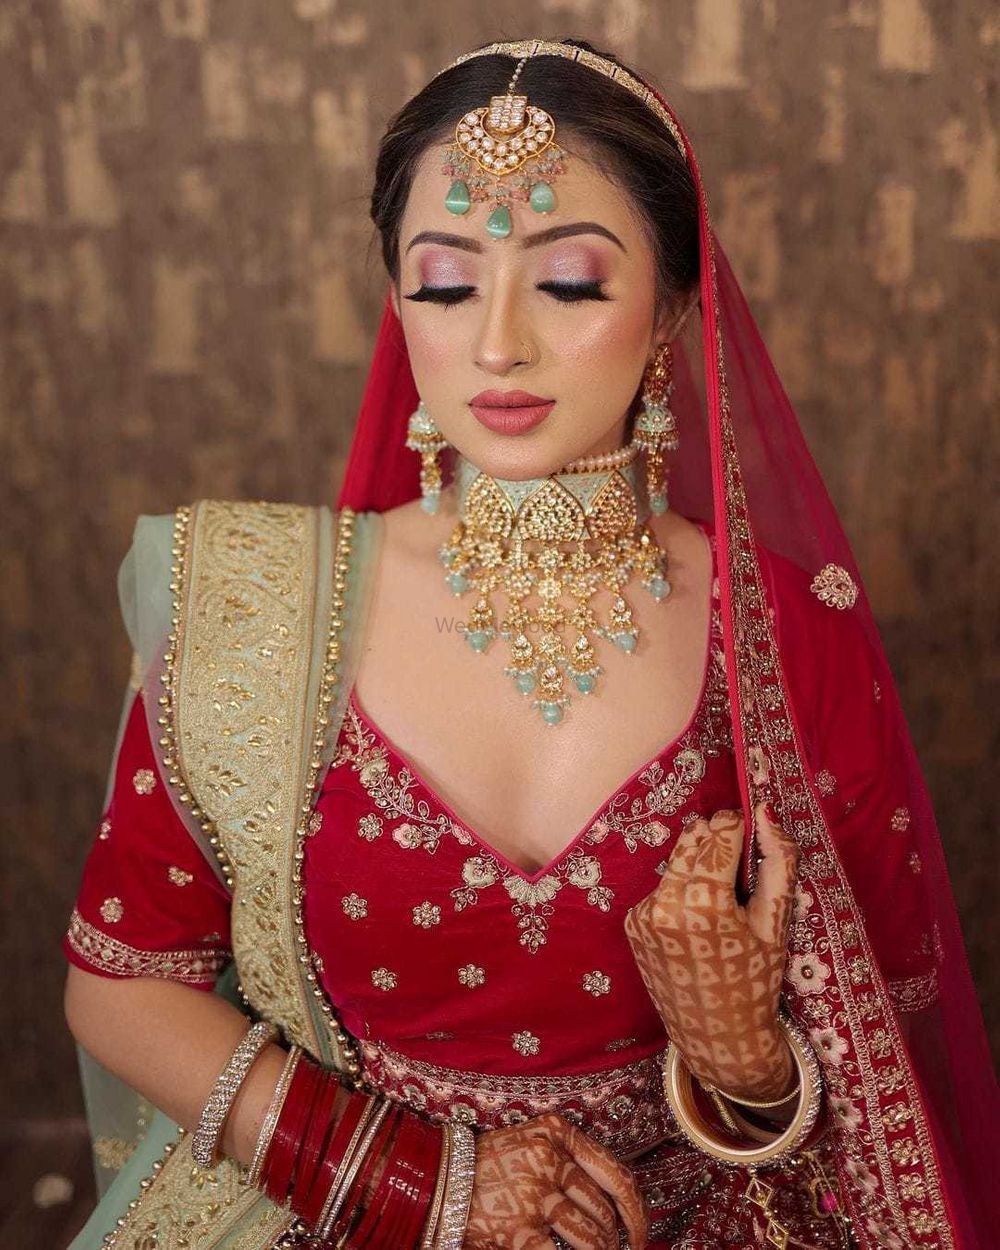 Photo From Bridal Makeup at Looks Beauty Salon and Spa - By Looks Bridal Makeup Salon and Spa